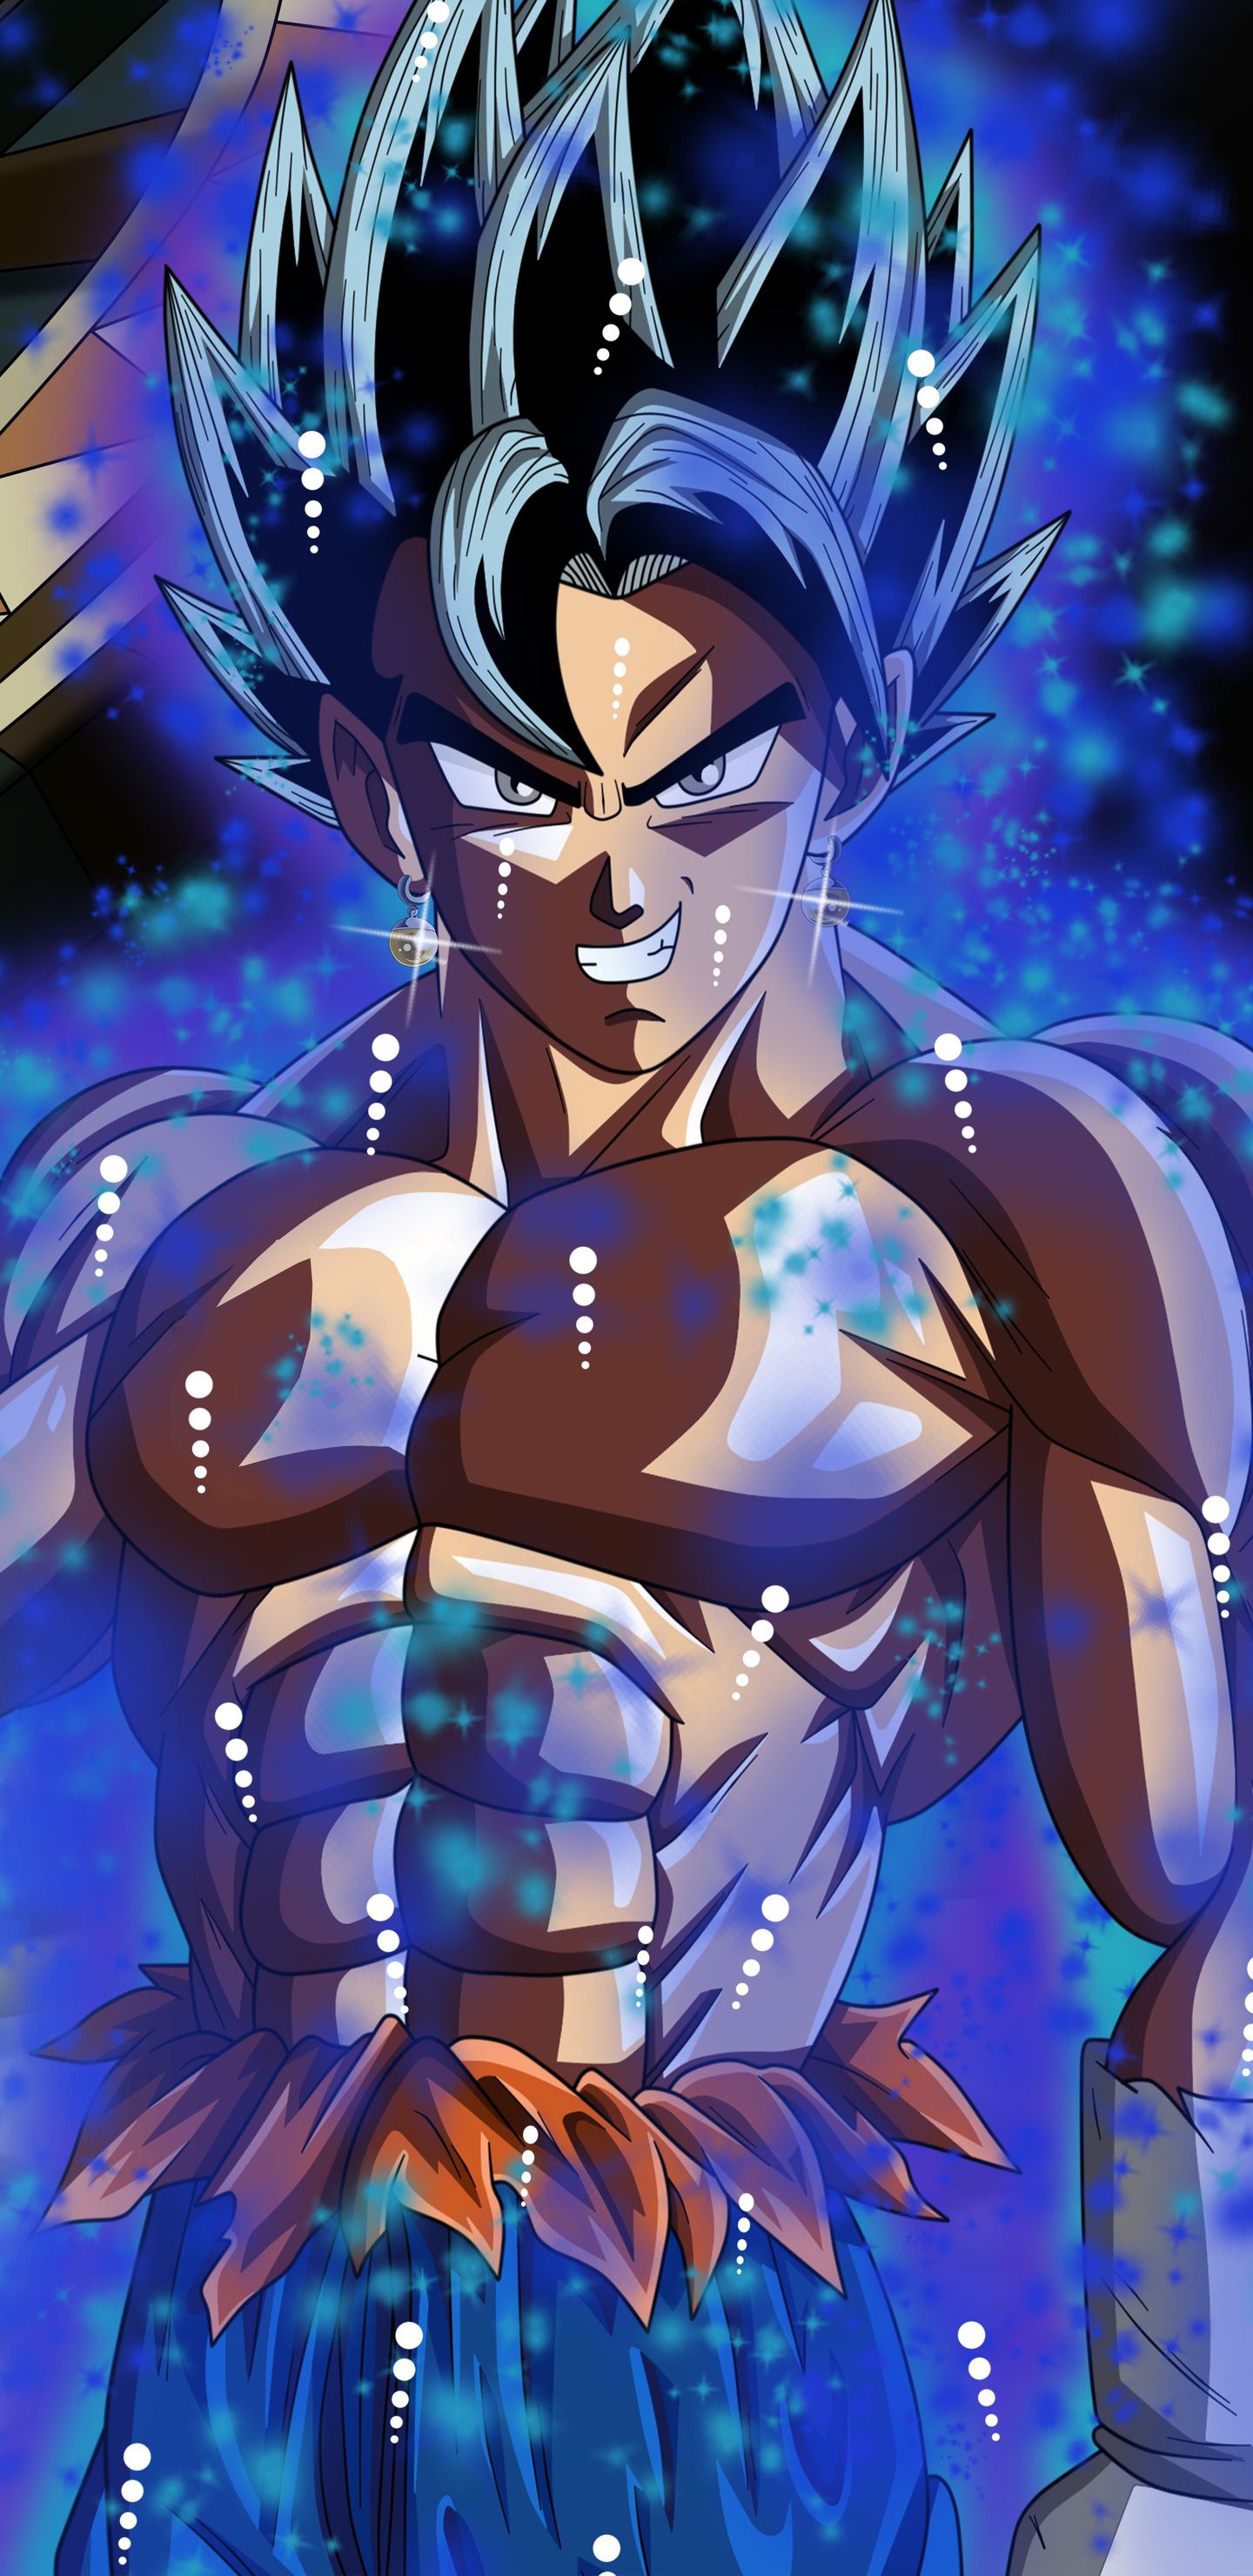 1080x1920 Goku 5k Dragon Ball Super Iphone 7,6s,6 Plus, Pixel xl ,One Plus  3,3t,5 ,HD 4k Wallpapers,Images,Backgrounds,Photos and Pictures